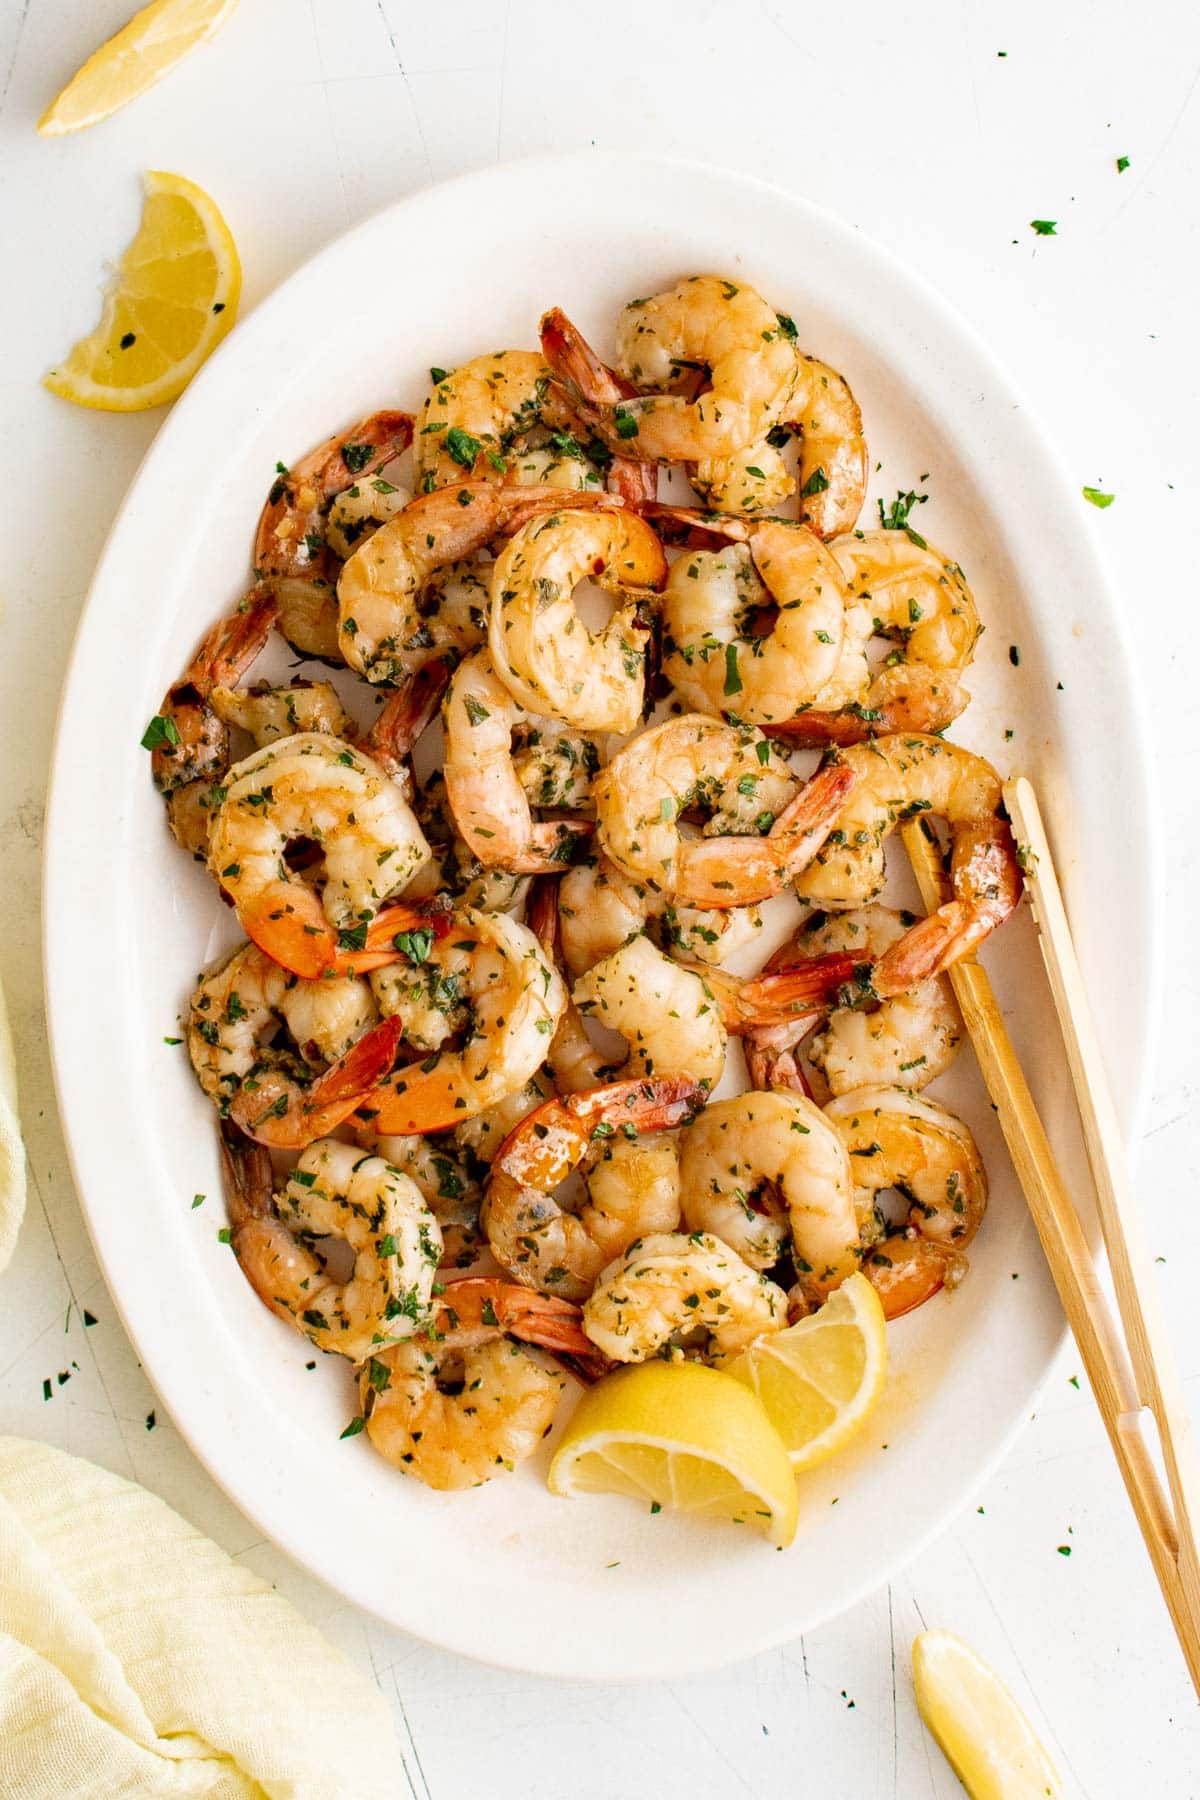 Marinated shrimp on a white platter with lemon slices and wood tongs.